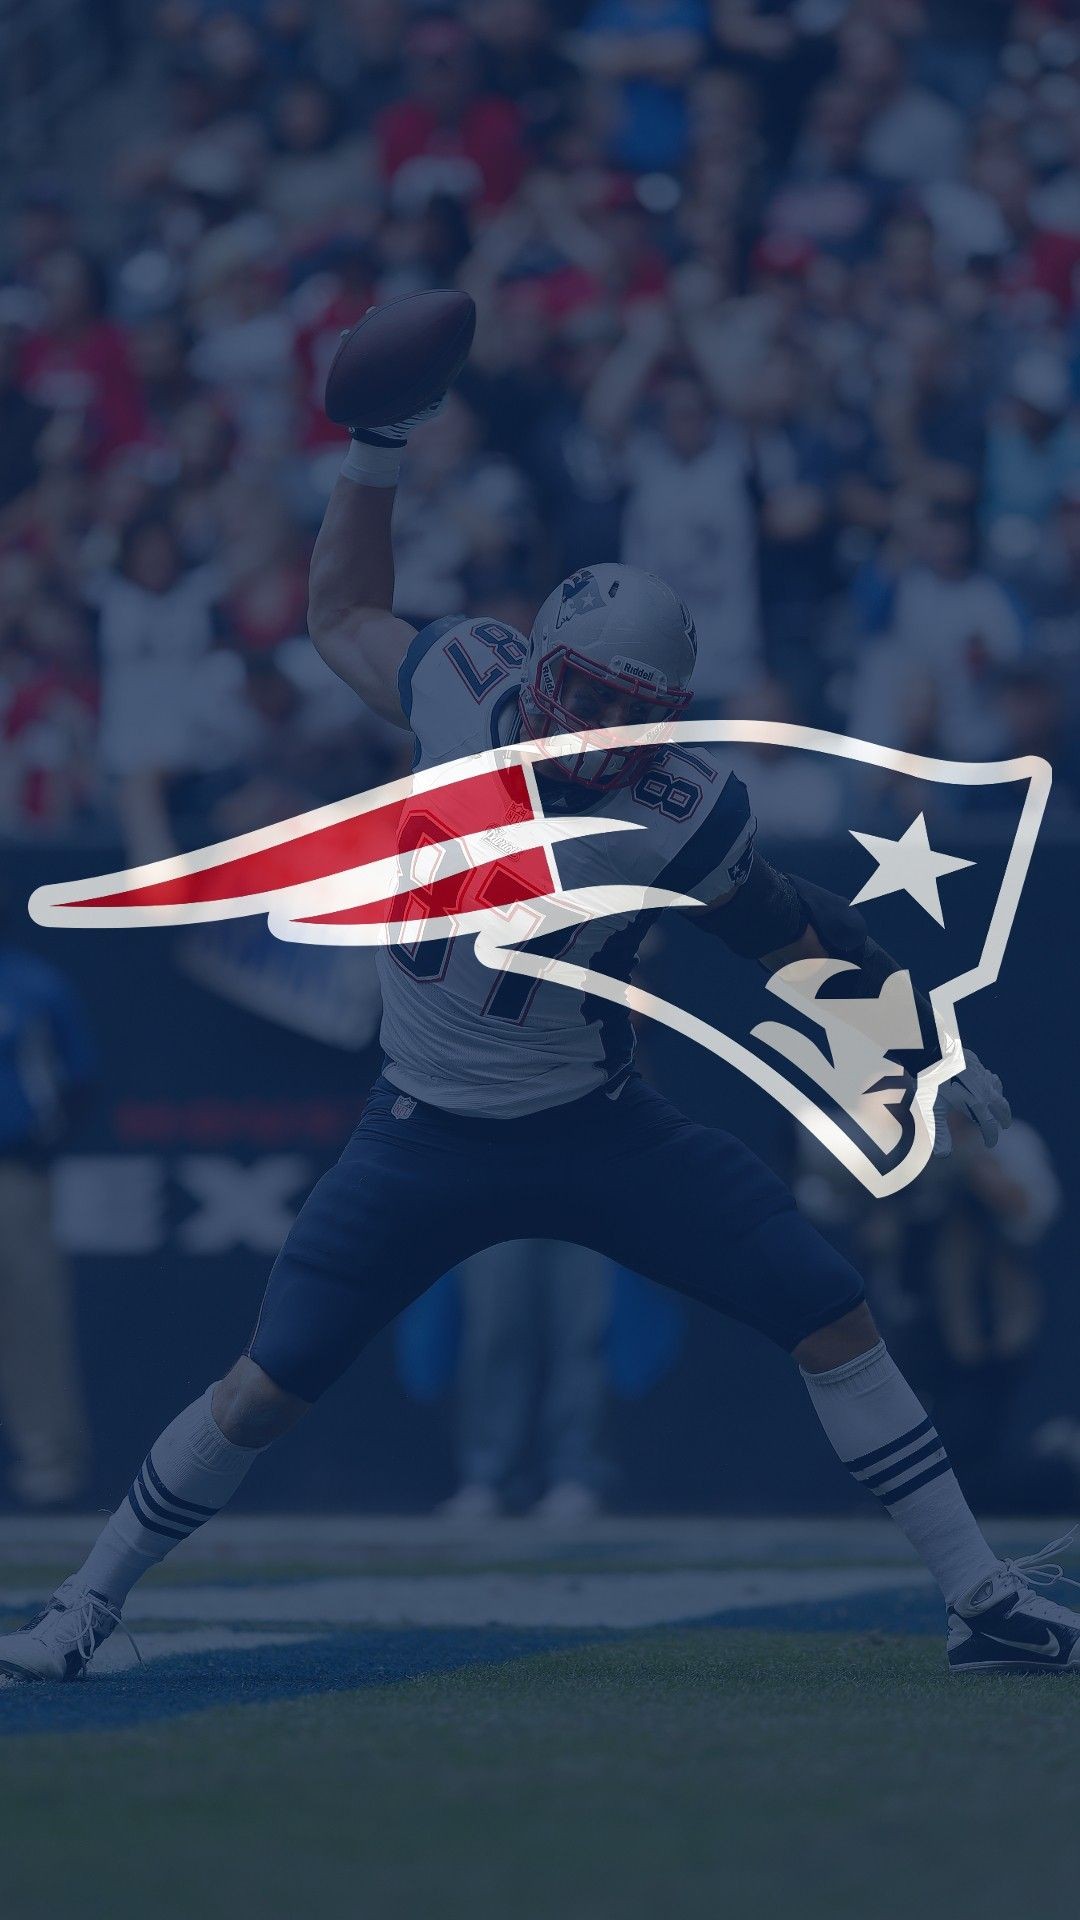 NE Patriots iPhone Wallpaper Size With high-resolution 1080X1920 pixel. Donwload and set as wallpaper for your iPhone X, iPhone XS home screen backgrounds, XS Max, XR, iPhone8 lock screen wallpaper, iPhone 7, 6, SE, and other mobile devices